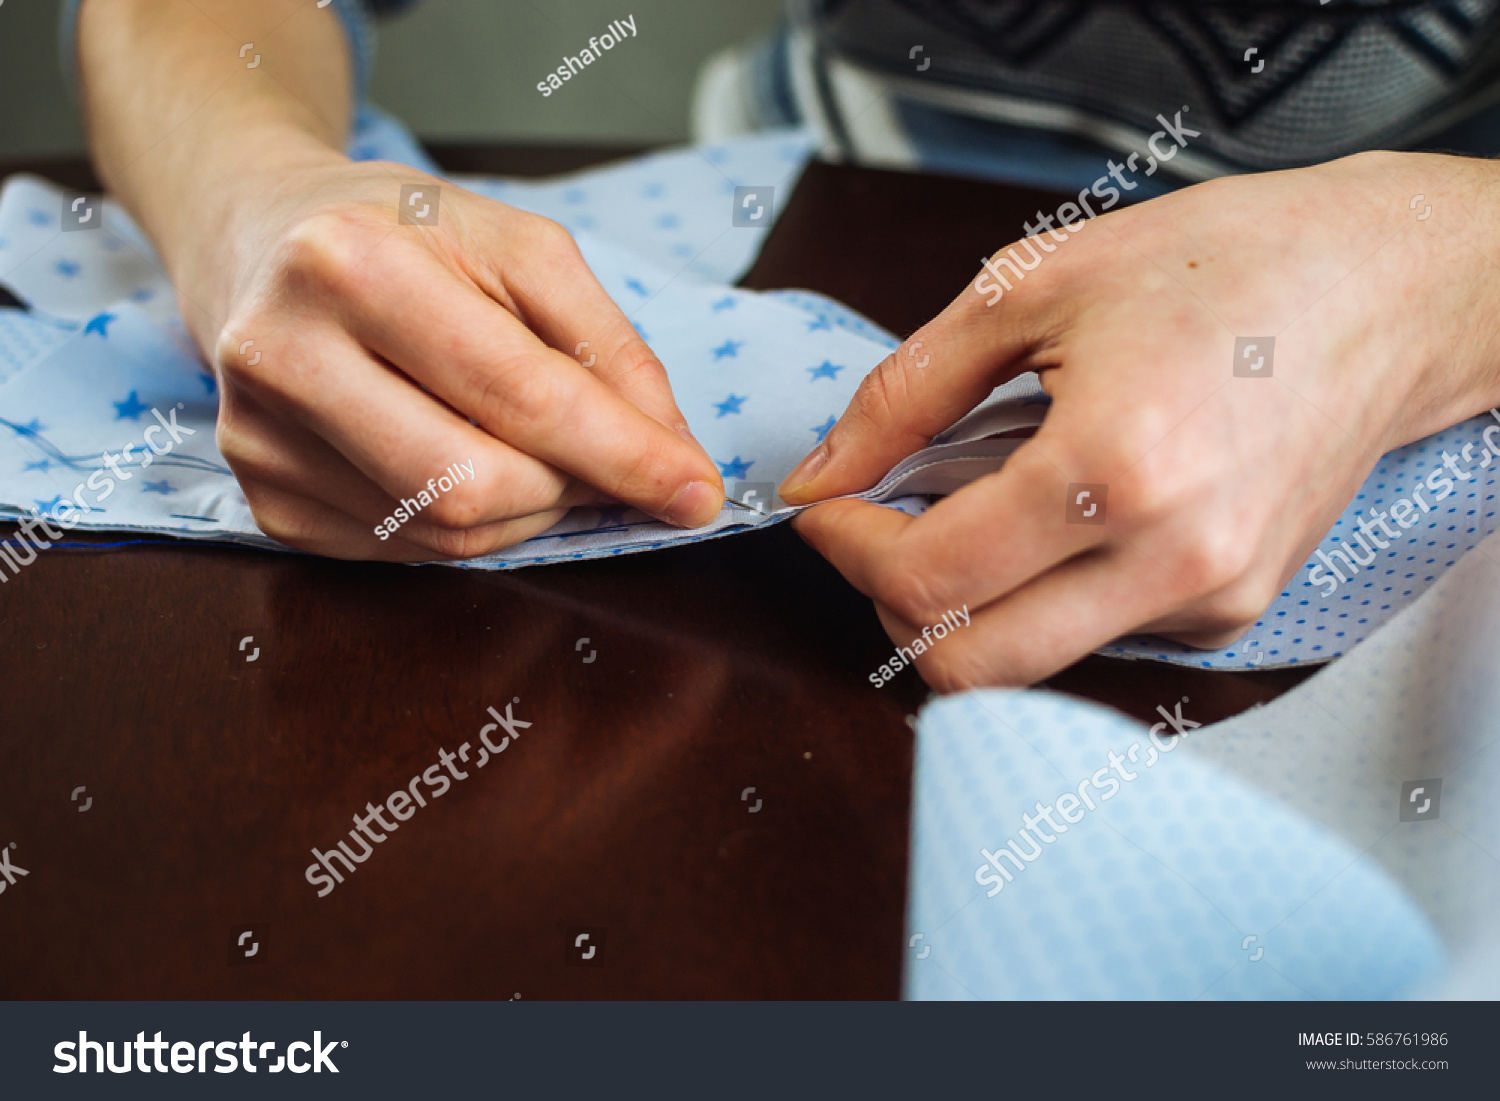 Close-up of woman's hand stitching quilting #586761986